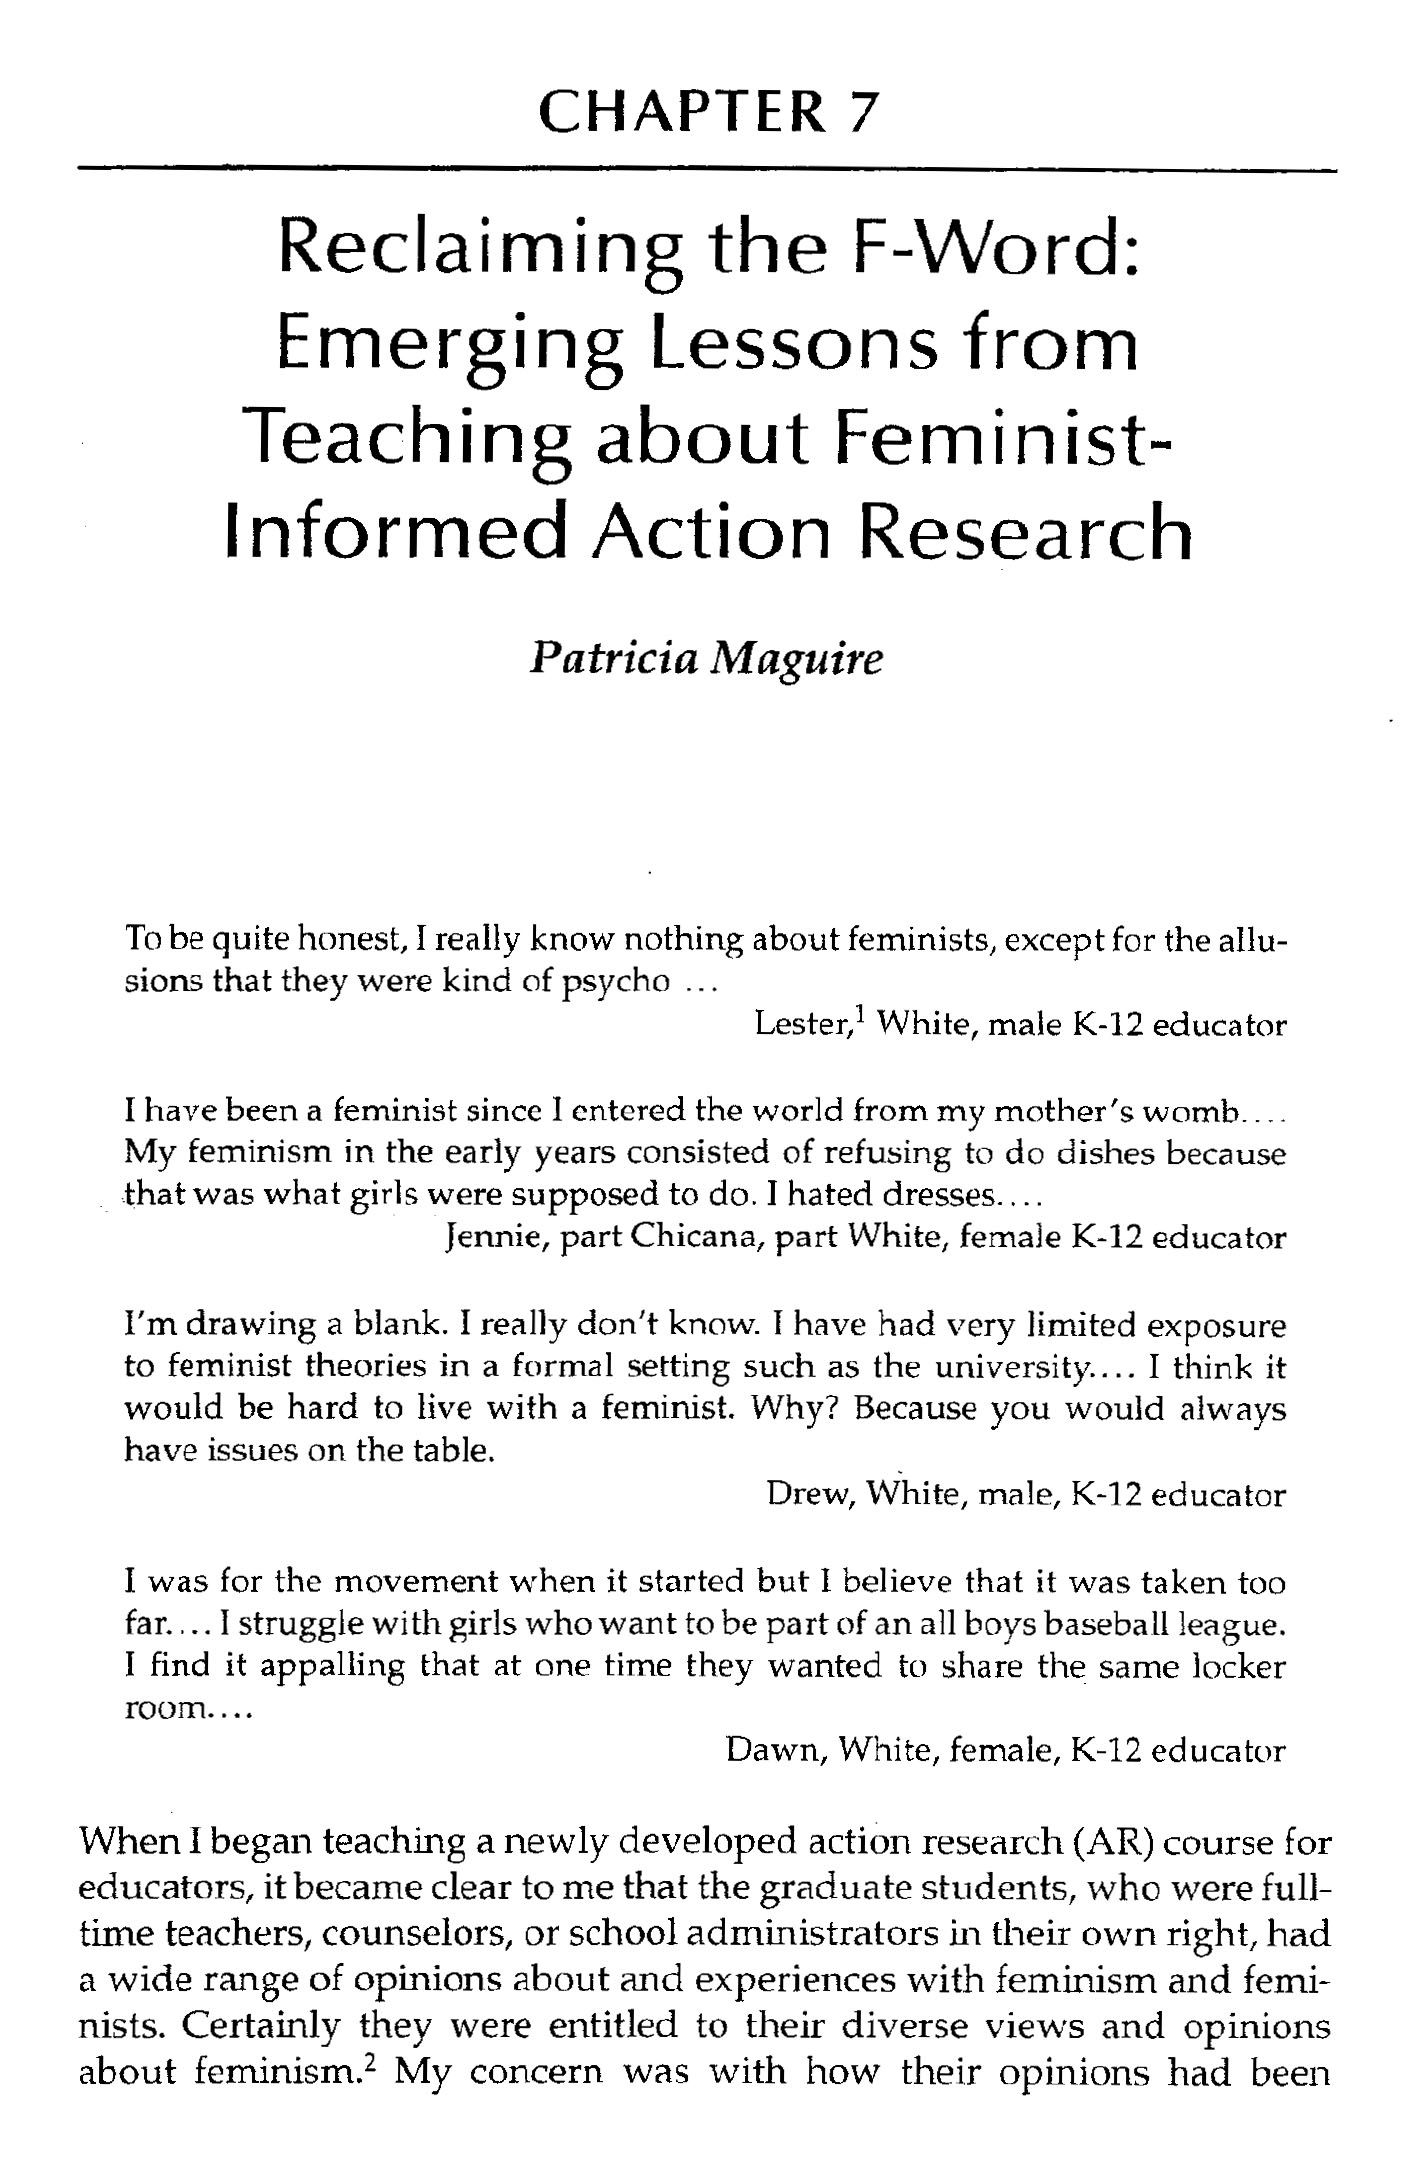 Reclaiming the f-word - Emerging lessons from teaching about feminist- informed action research 2004